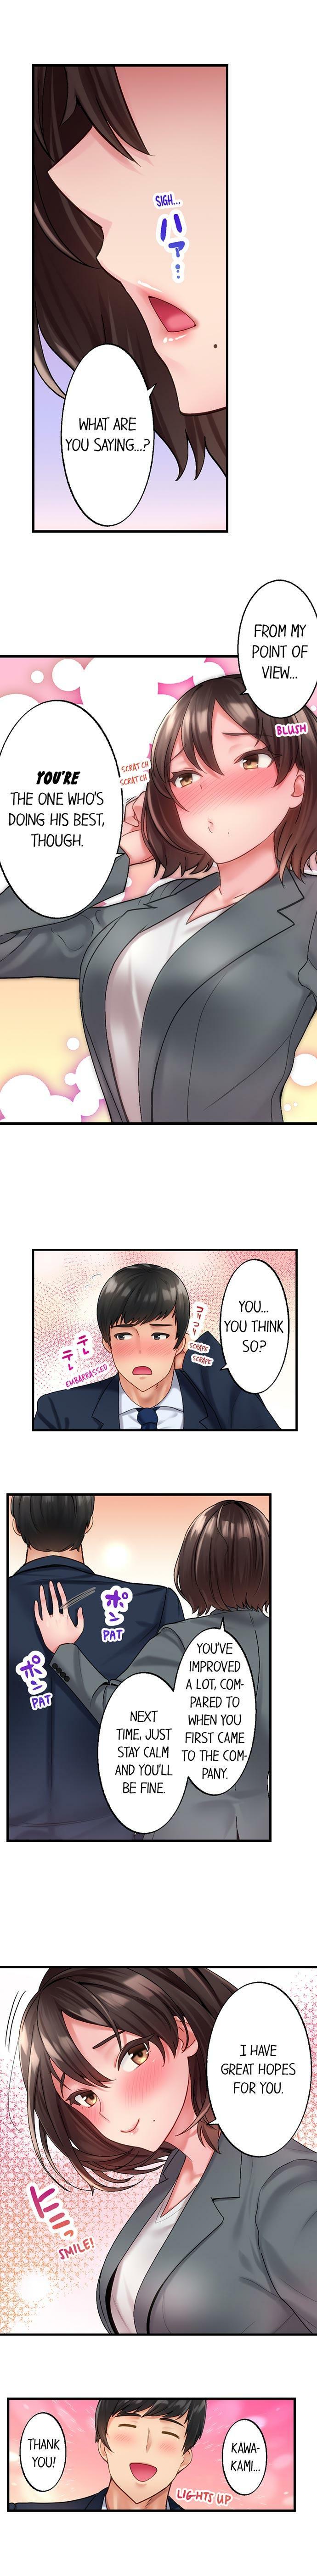 [Kayanoi Ino] Busted by my Co-Worker 18/18 [English] Completed 4